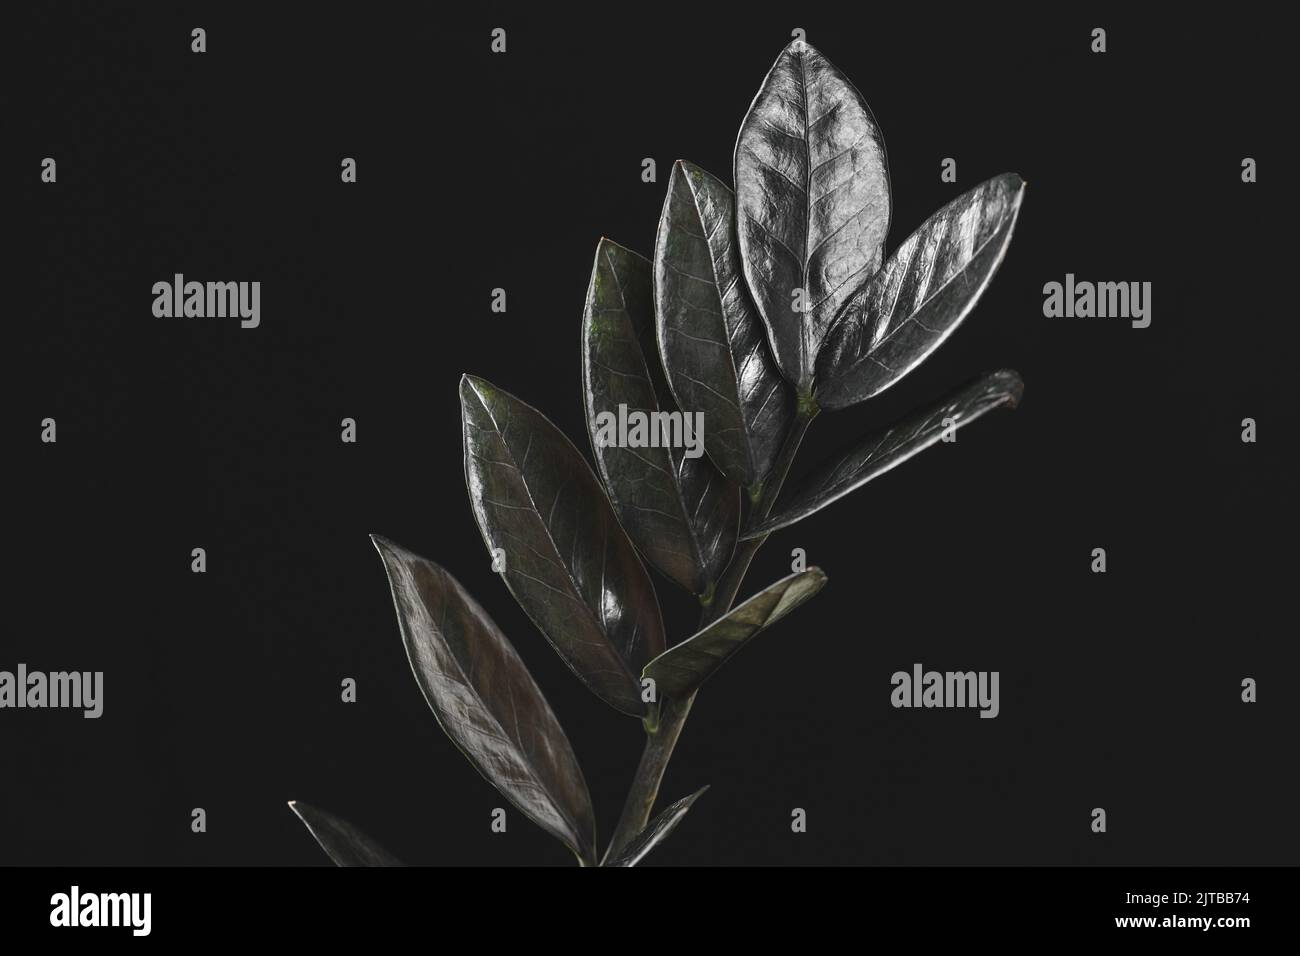 Zamioculcas Zamiifolia Raven, potted house plant with black leaves over black background with copy space. Spooky dark plants collection Stock Photo